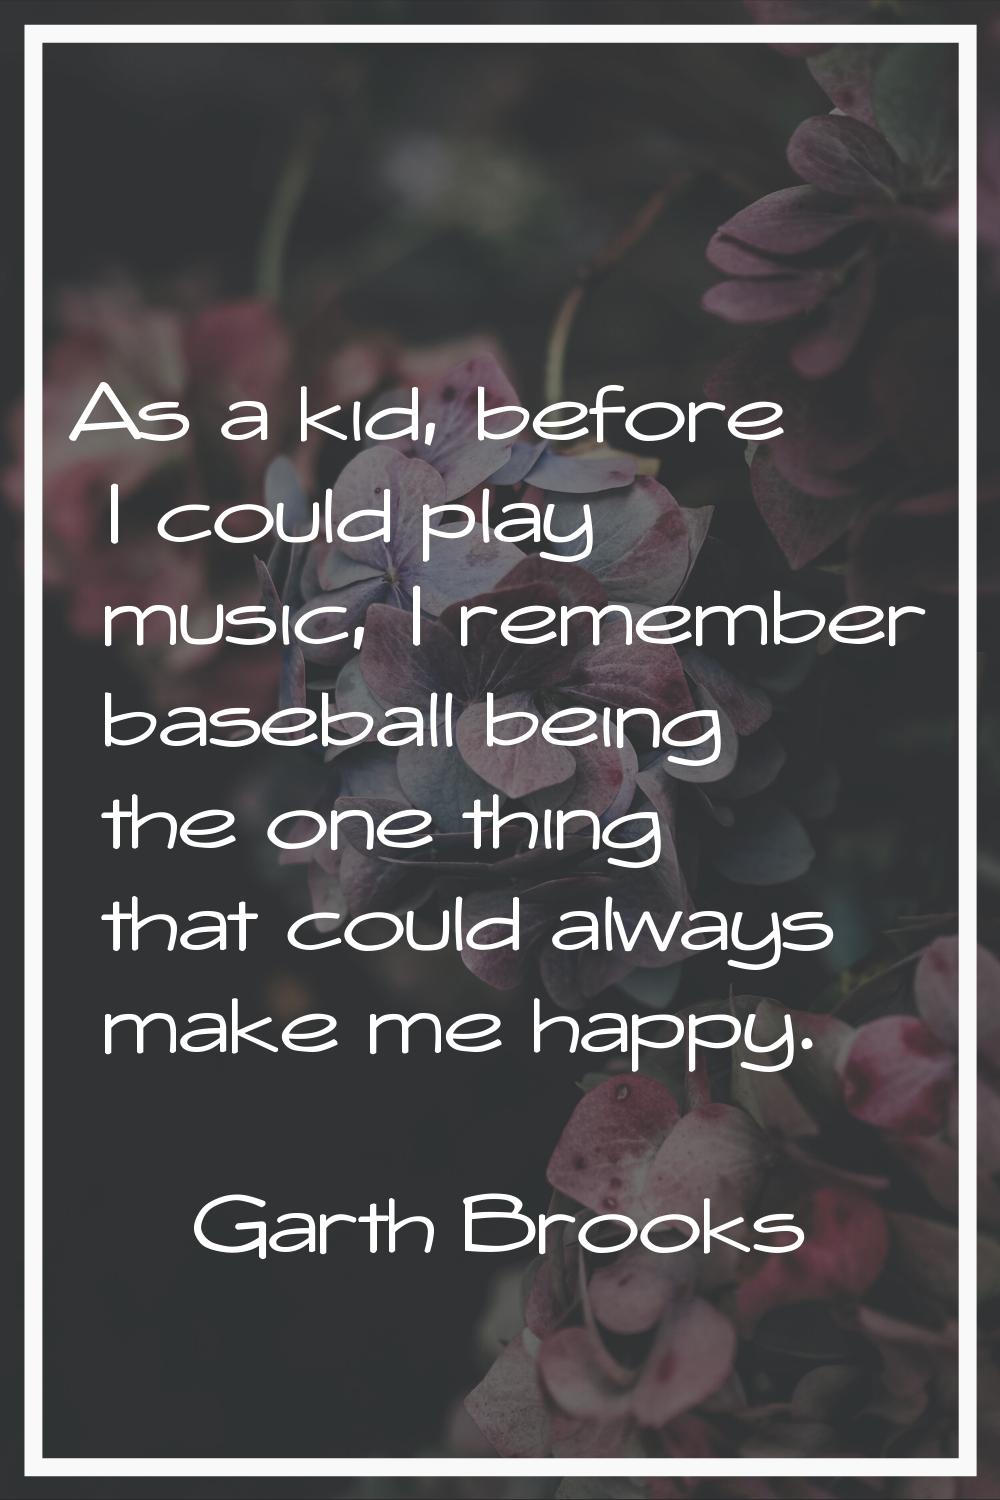 As a kid, before I could play music, I remember baseball being the one thing that could always make